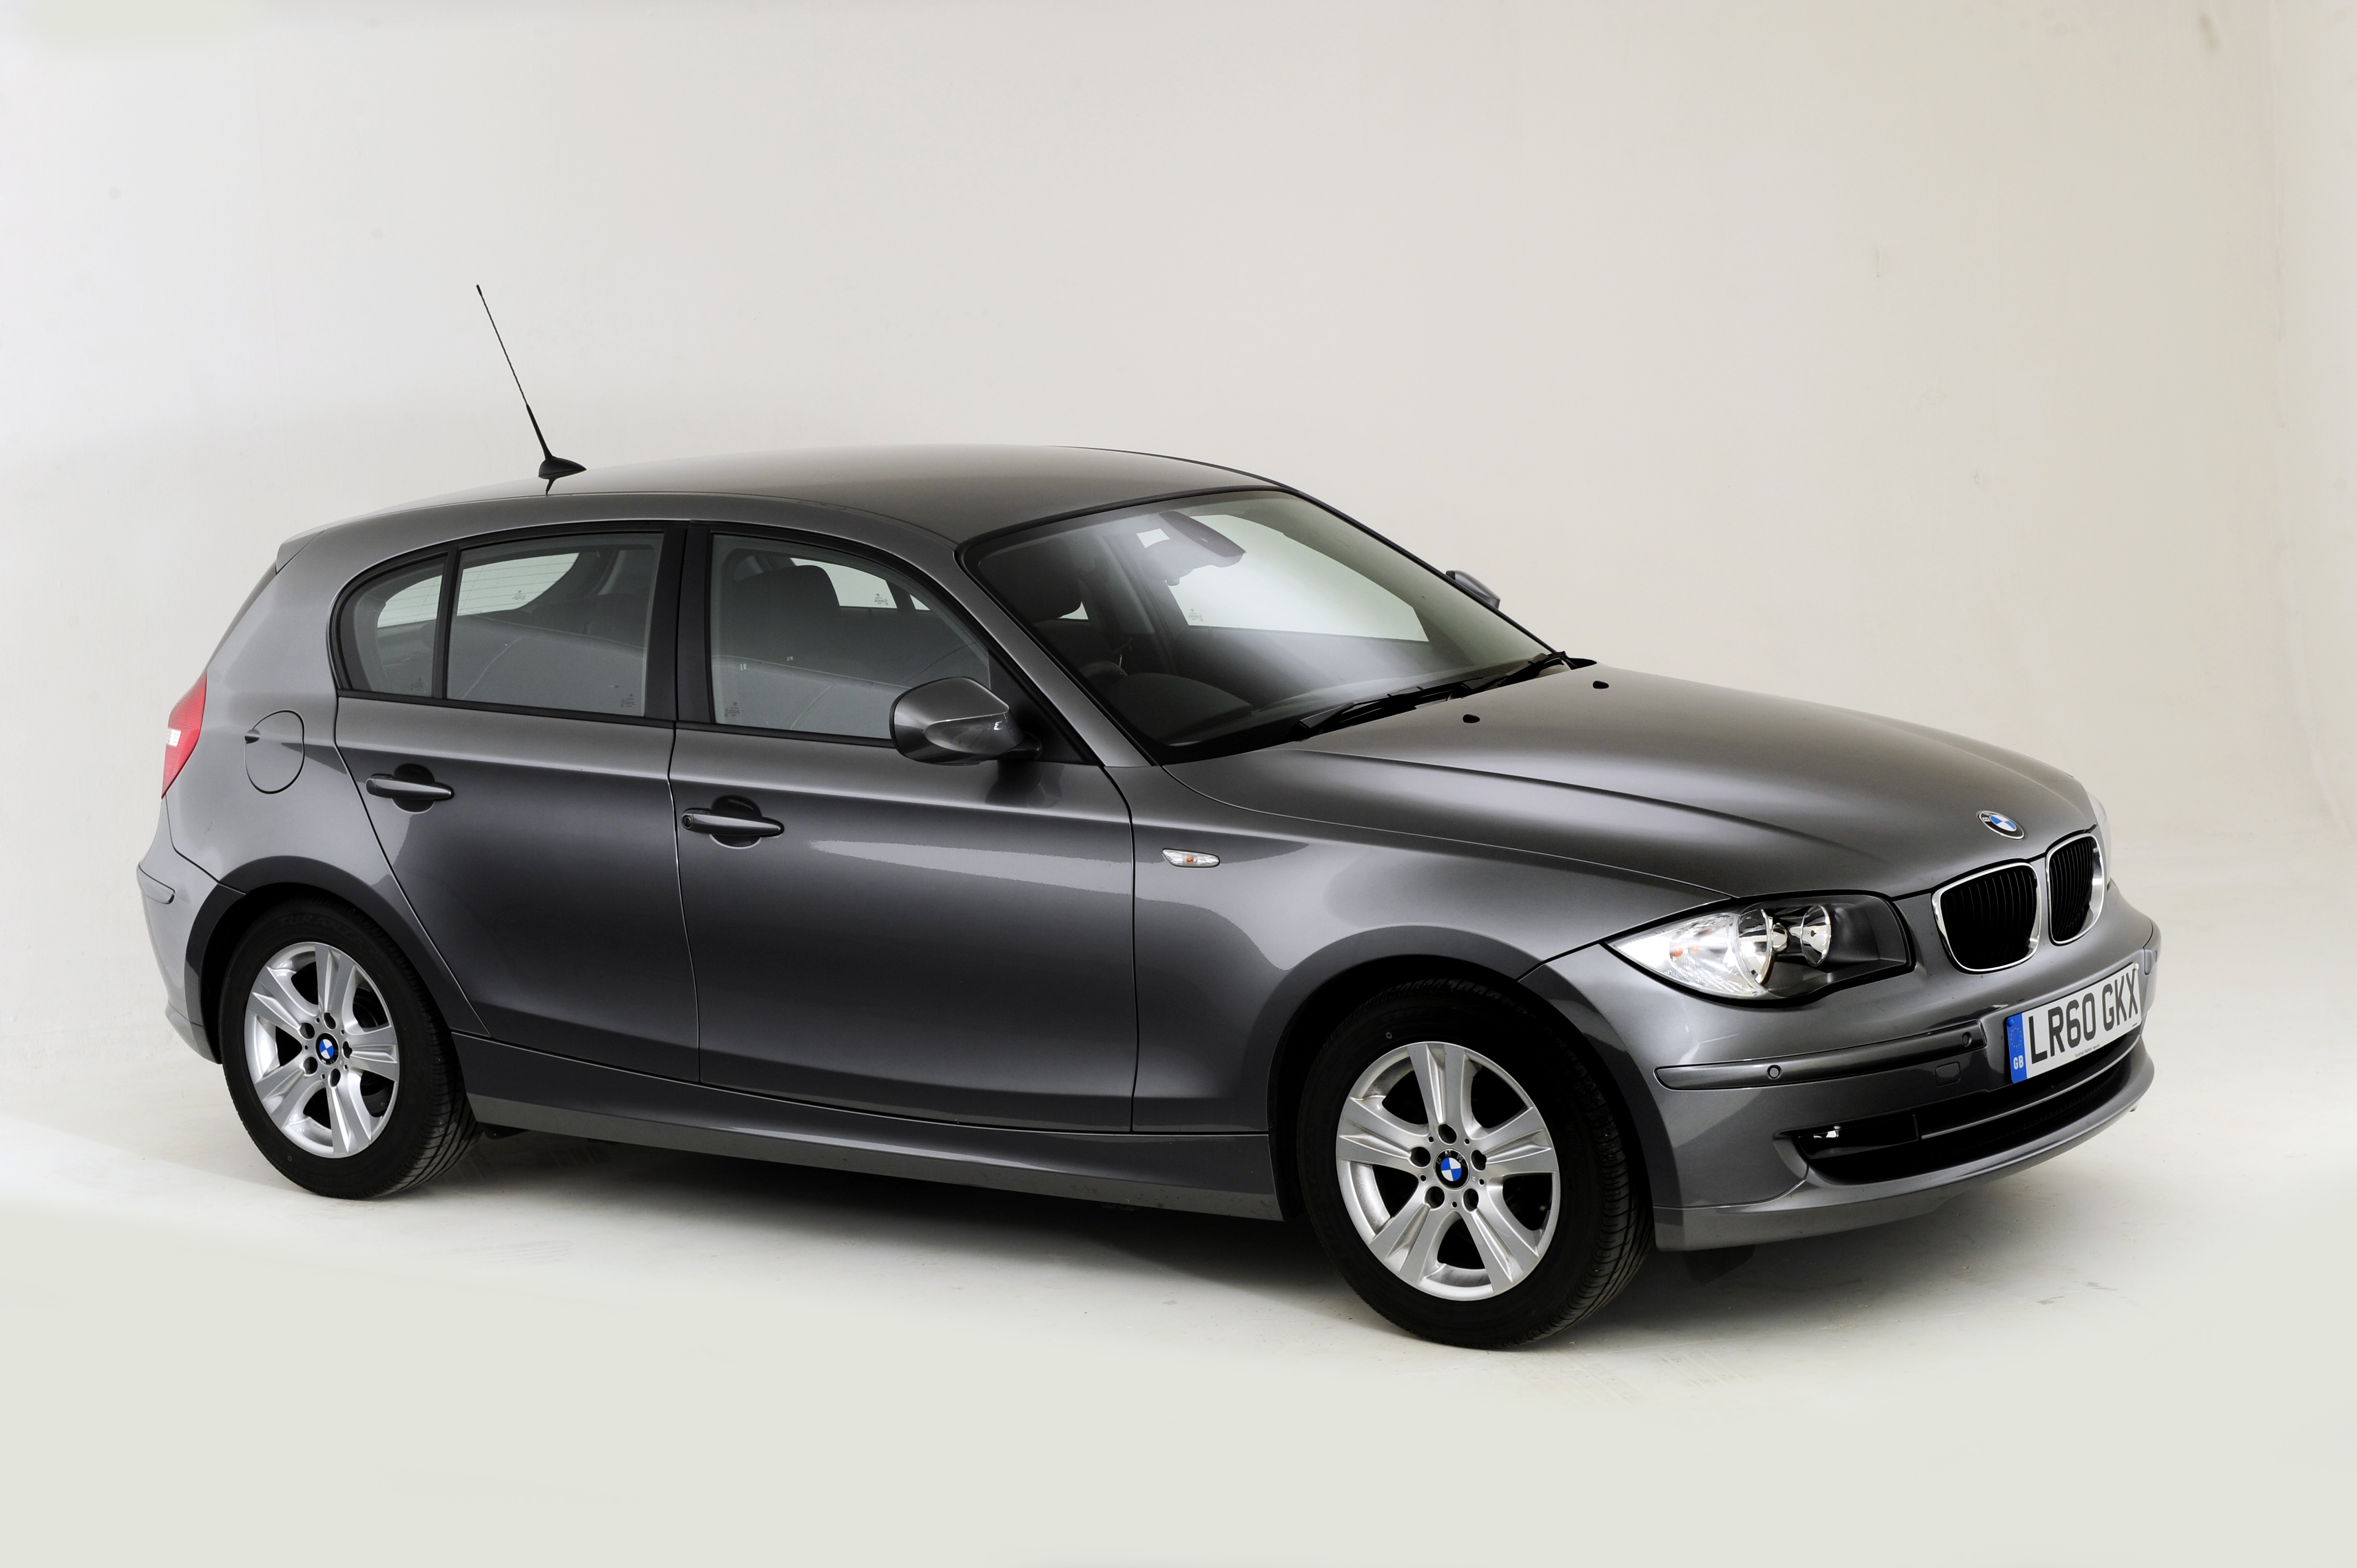 Used BMW buying guide: 2004-2011 (Mk1) |